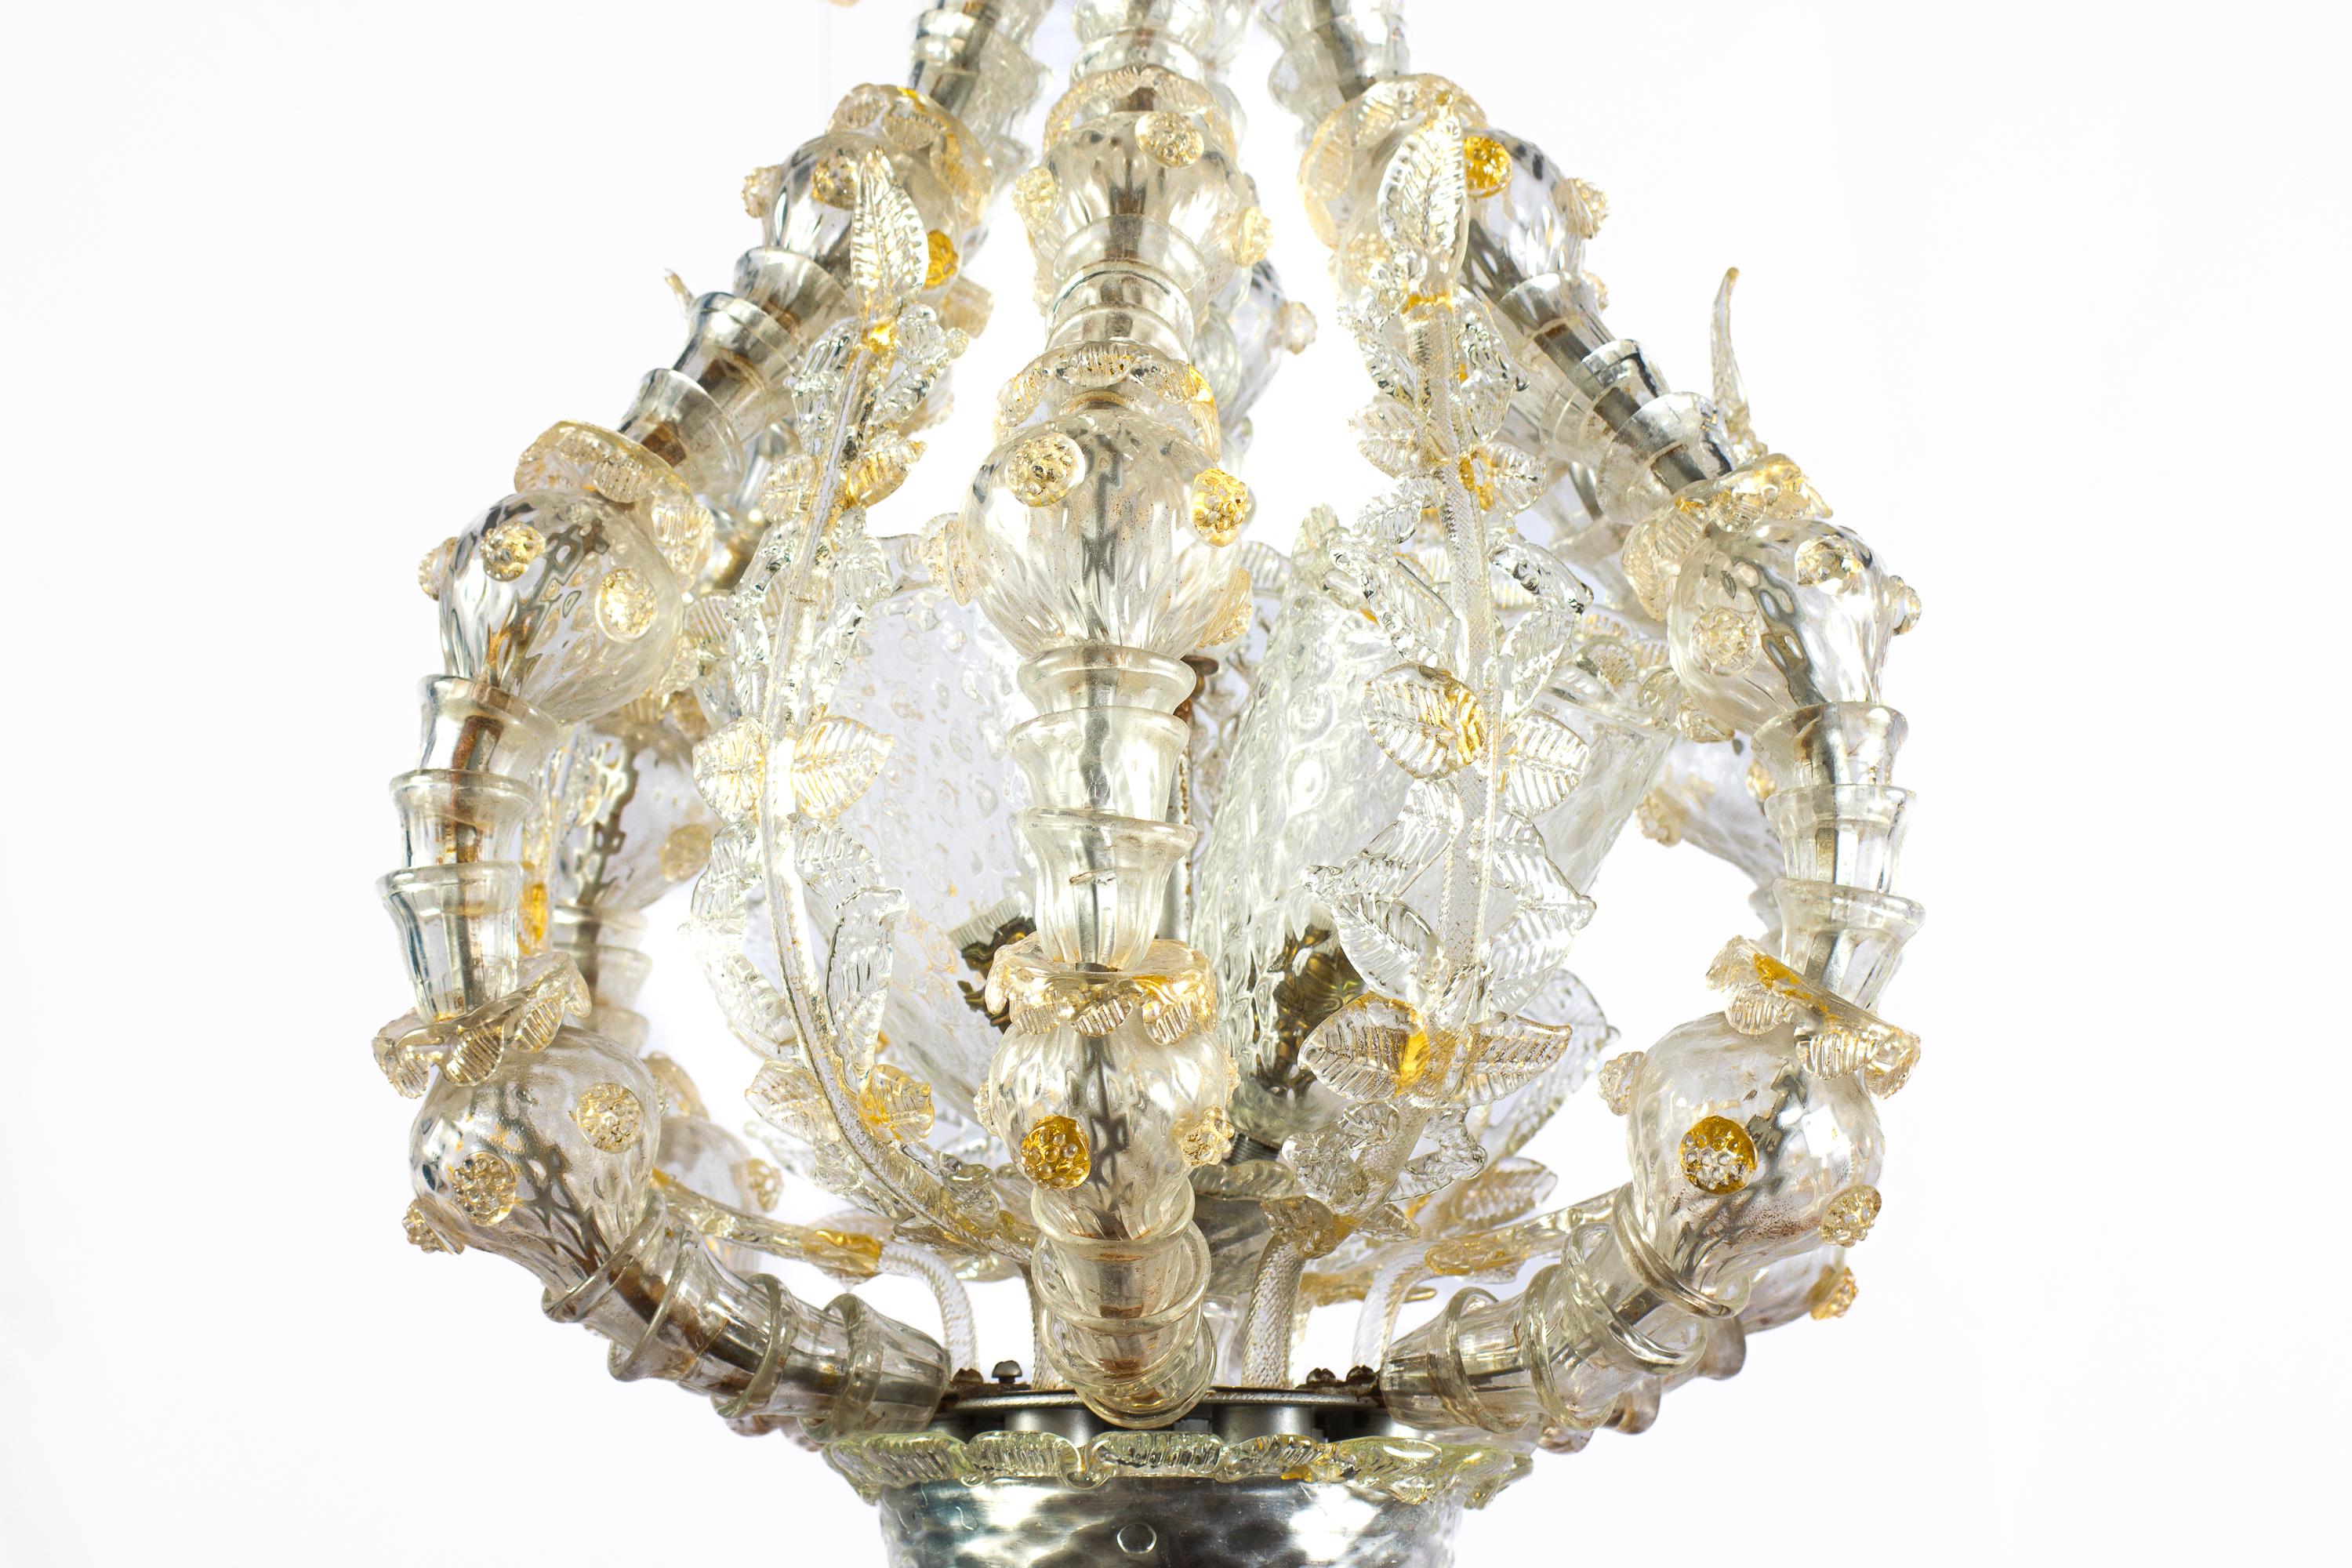 Overwhelming Murano Glass Lantern or Chandelier by Barovier & Toso, 1940' In Excellent Condition For Sale In Rome, IT